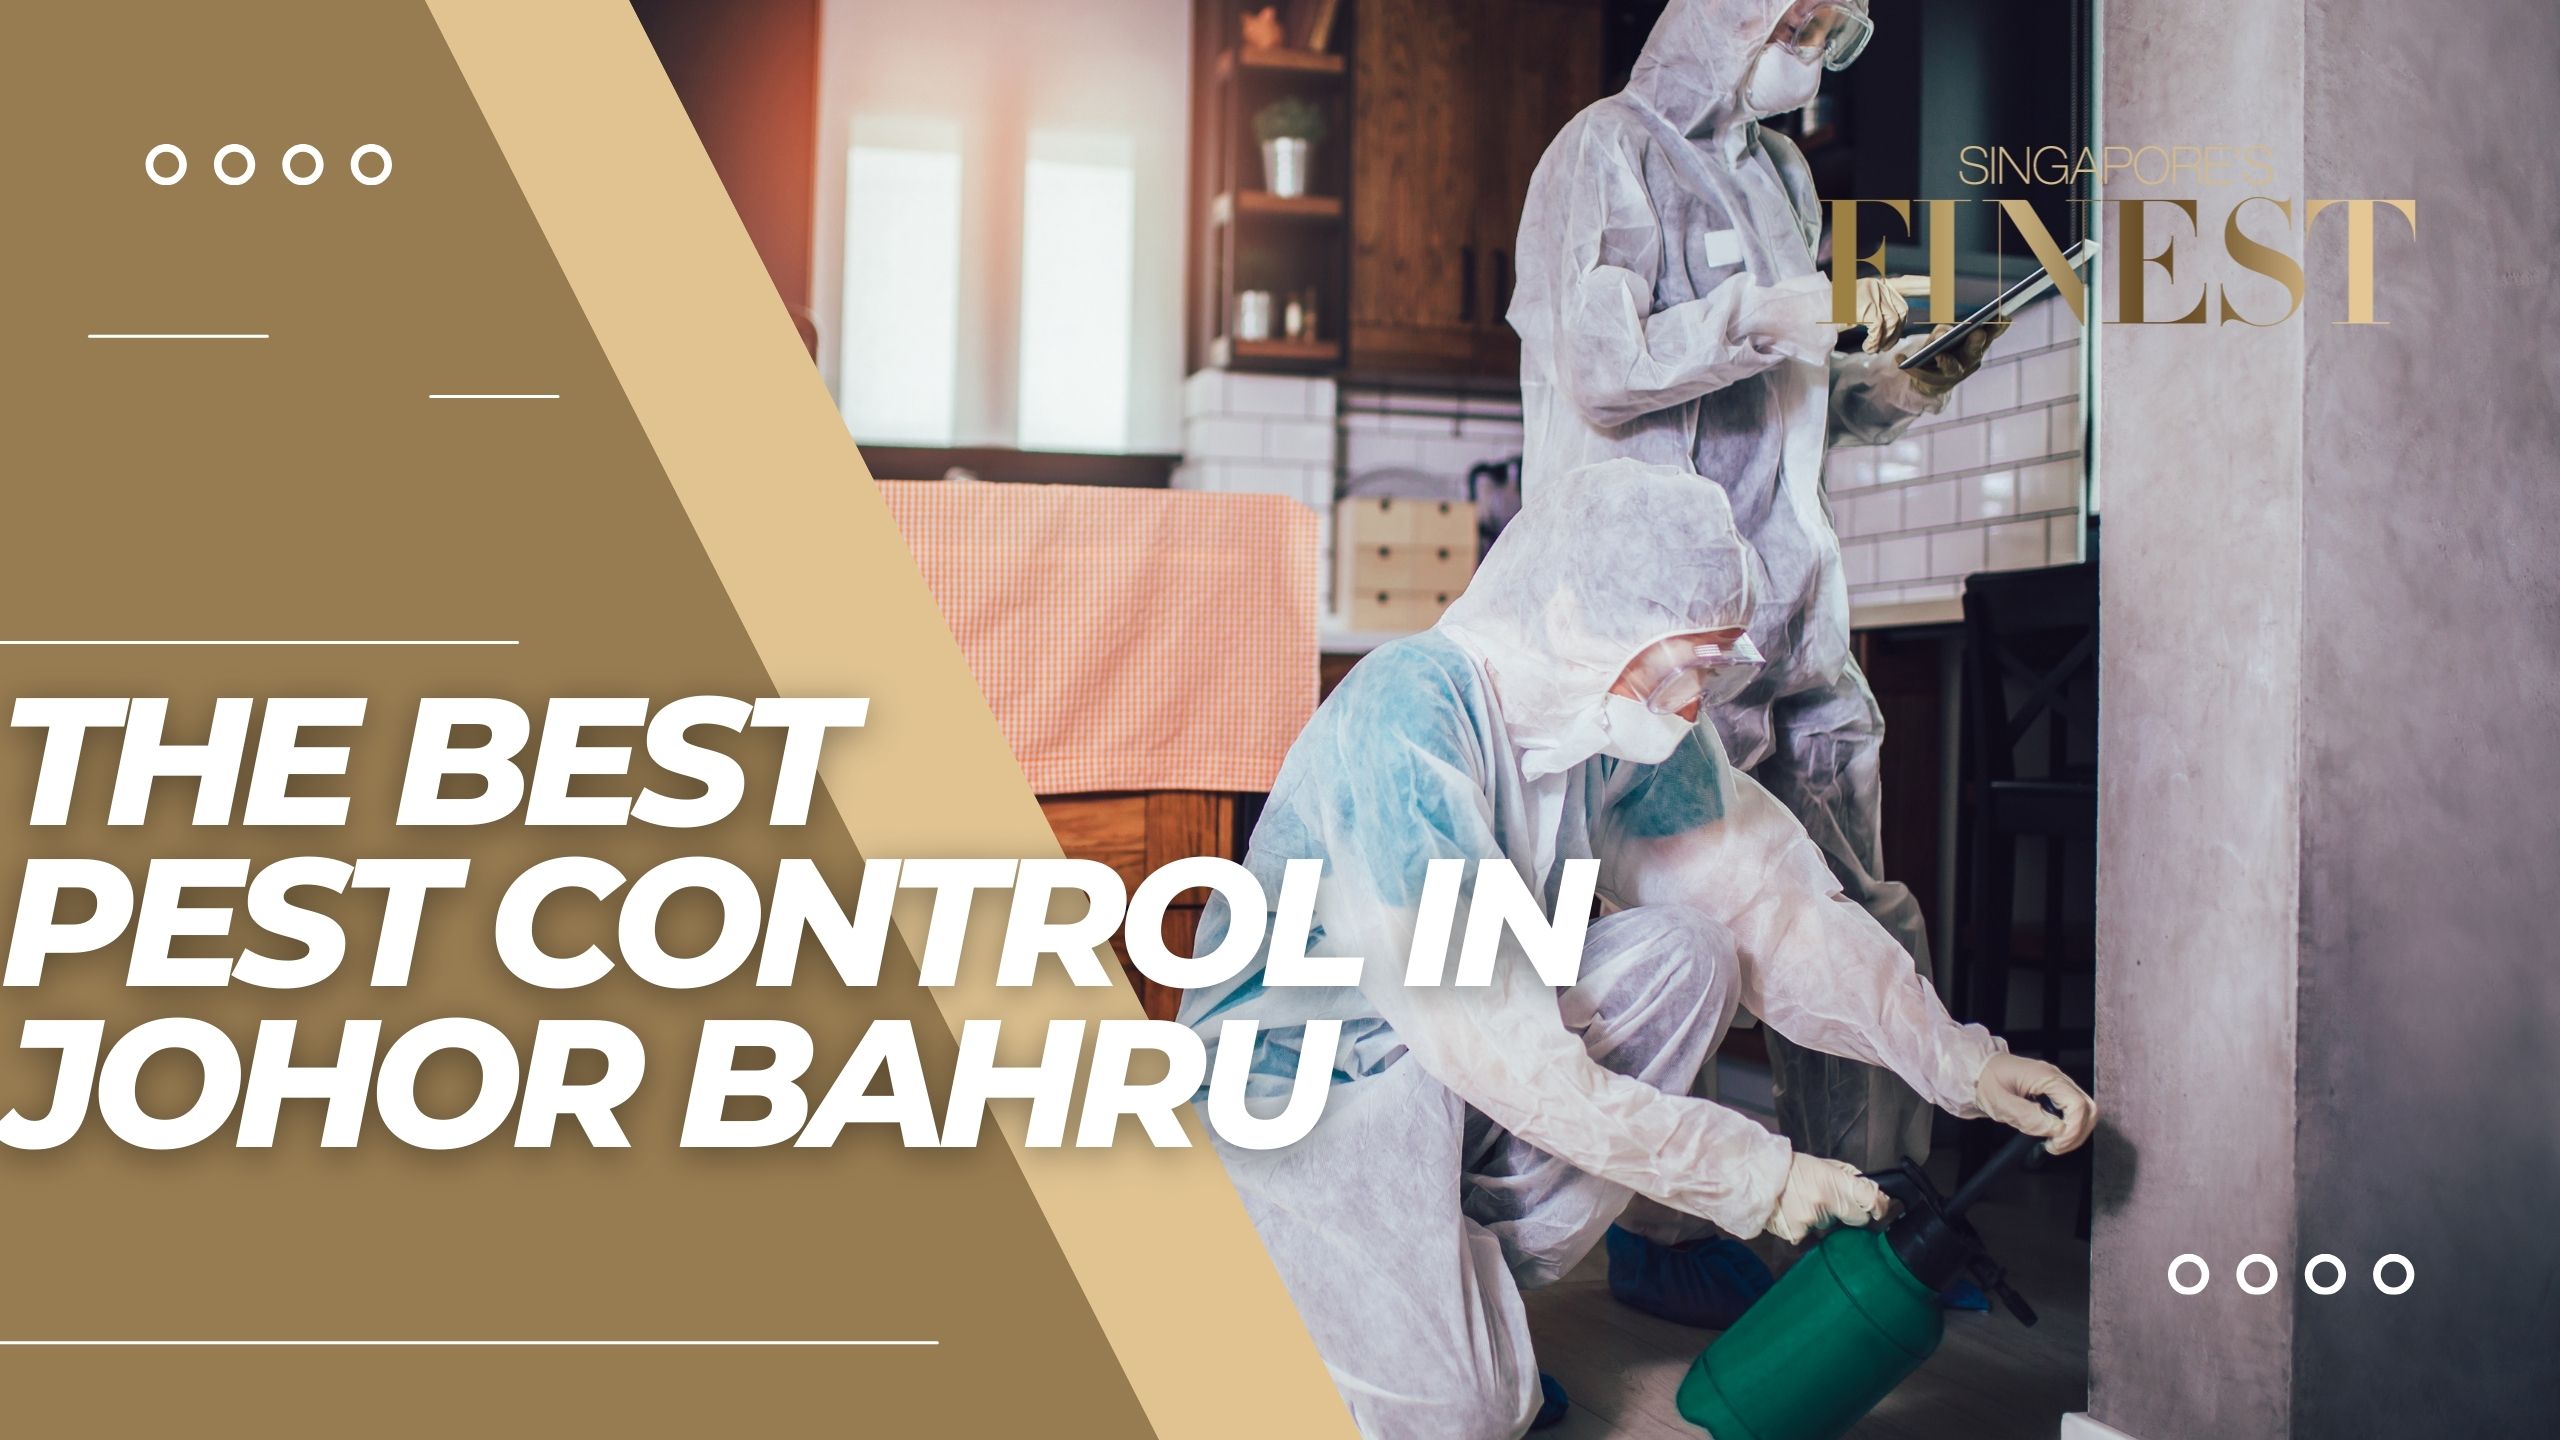 The Finest Companies for the Best Pest Control in Johor Bahru